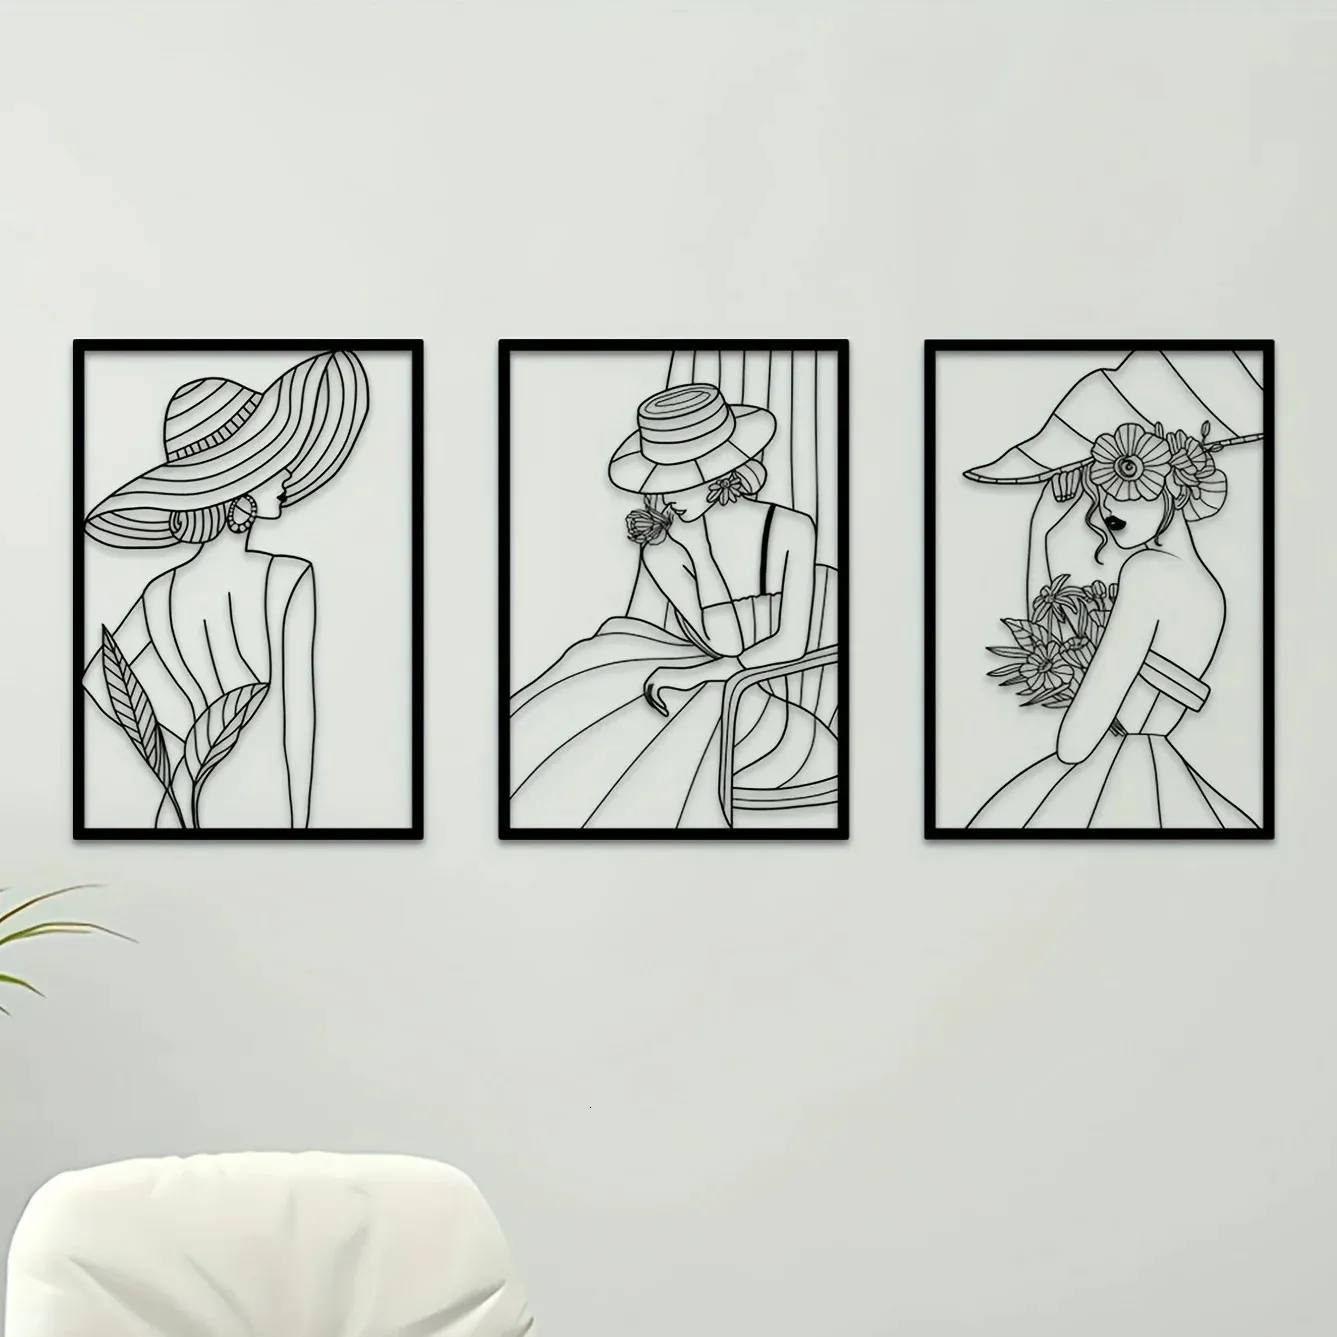 3 Pcs Fashion Lady Metal Wall Decor Vintage Ladies Wall Art Modern Female Pictures For Home Decoration For Hanging Above The Bed 240304